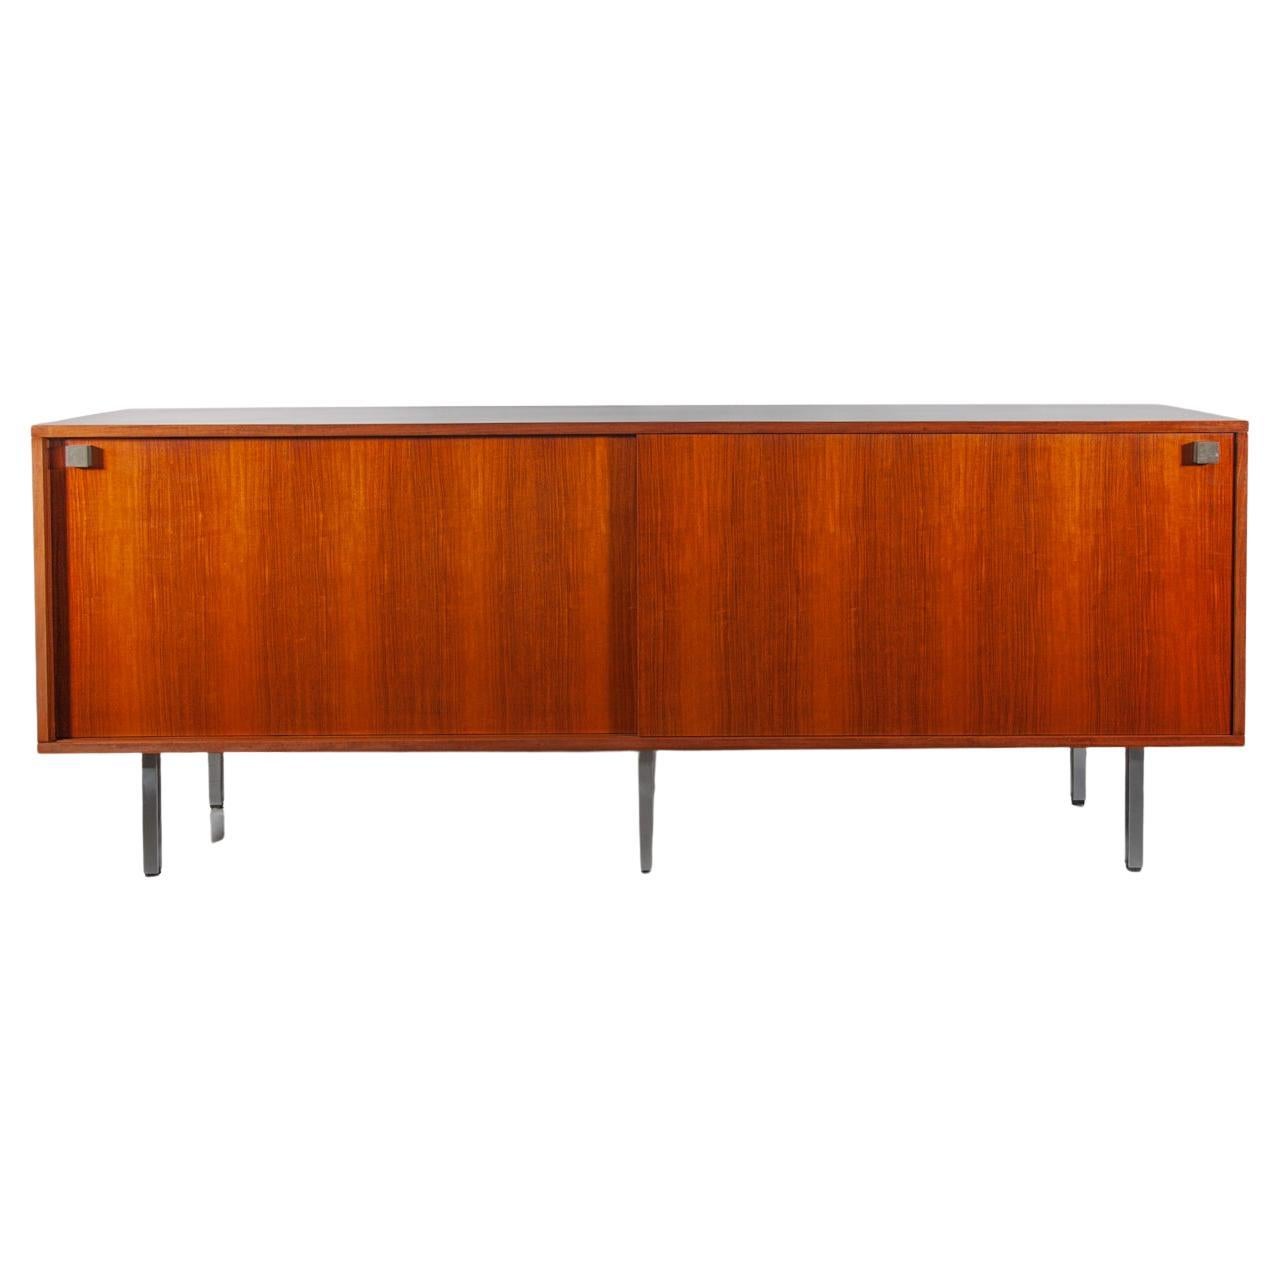 Sideboard by Alfred Hendricks for Belform, Belgium, 1960s. Large floating sideboard by Belgian designer Alfred Hendriks for the manufacture Belform. This sideboard consists of two sliding doors with characteristic chrome square handles. The design